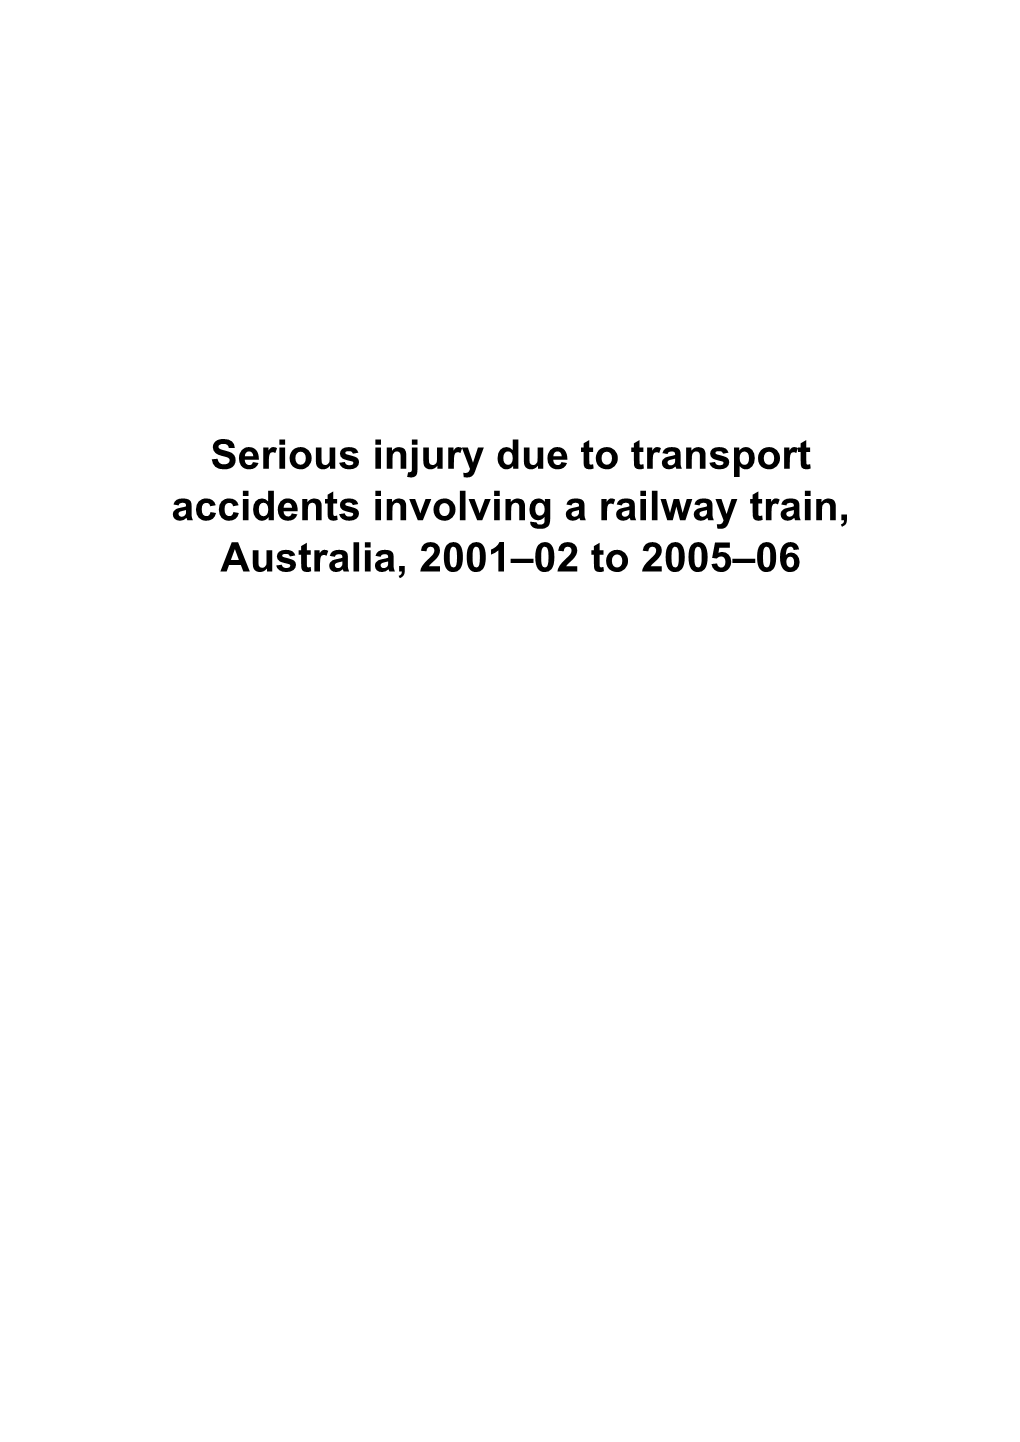 Serious Injury Due to Transport Accidents Involving a Railway Train